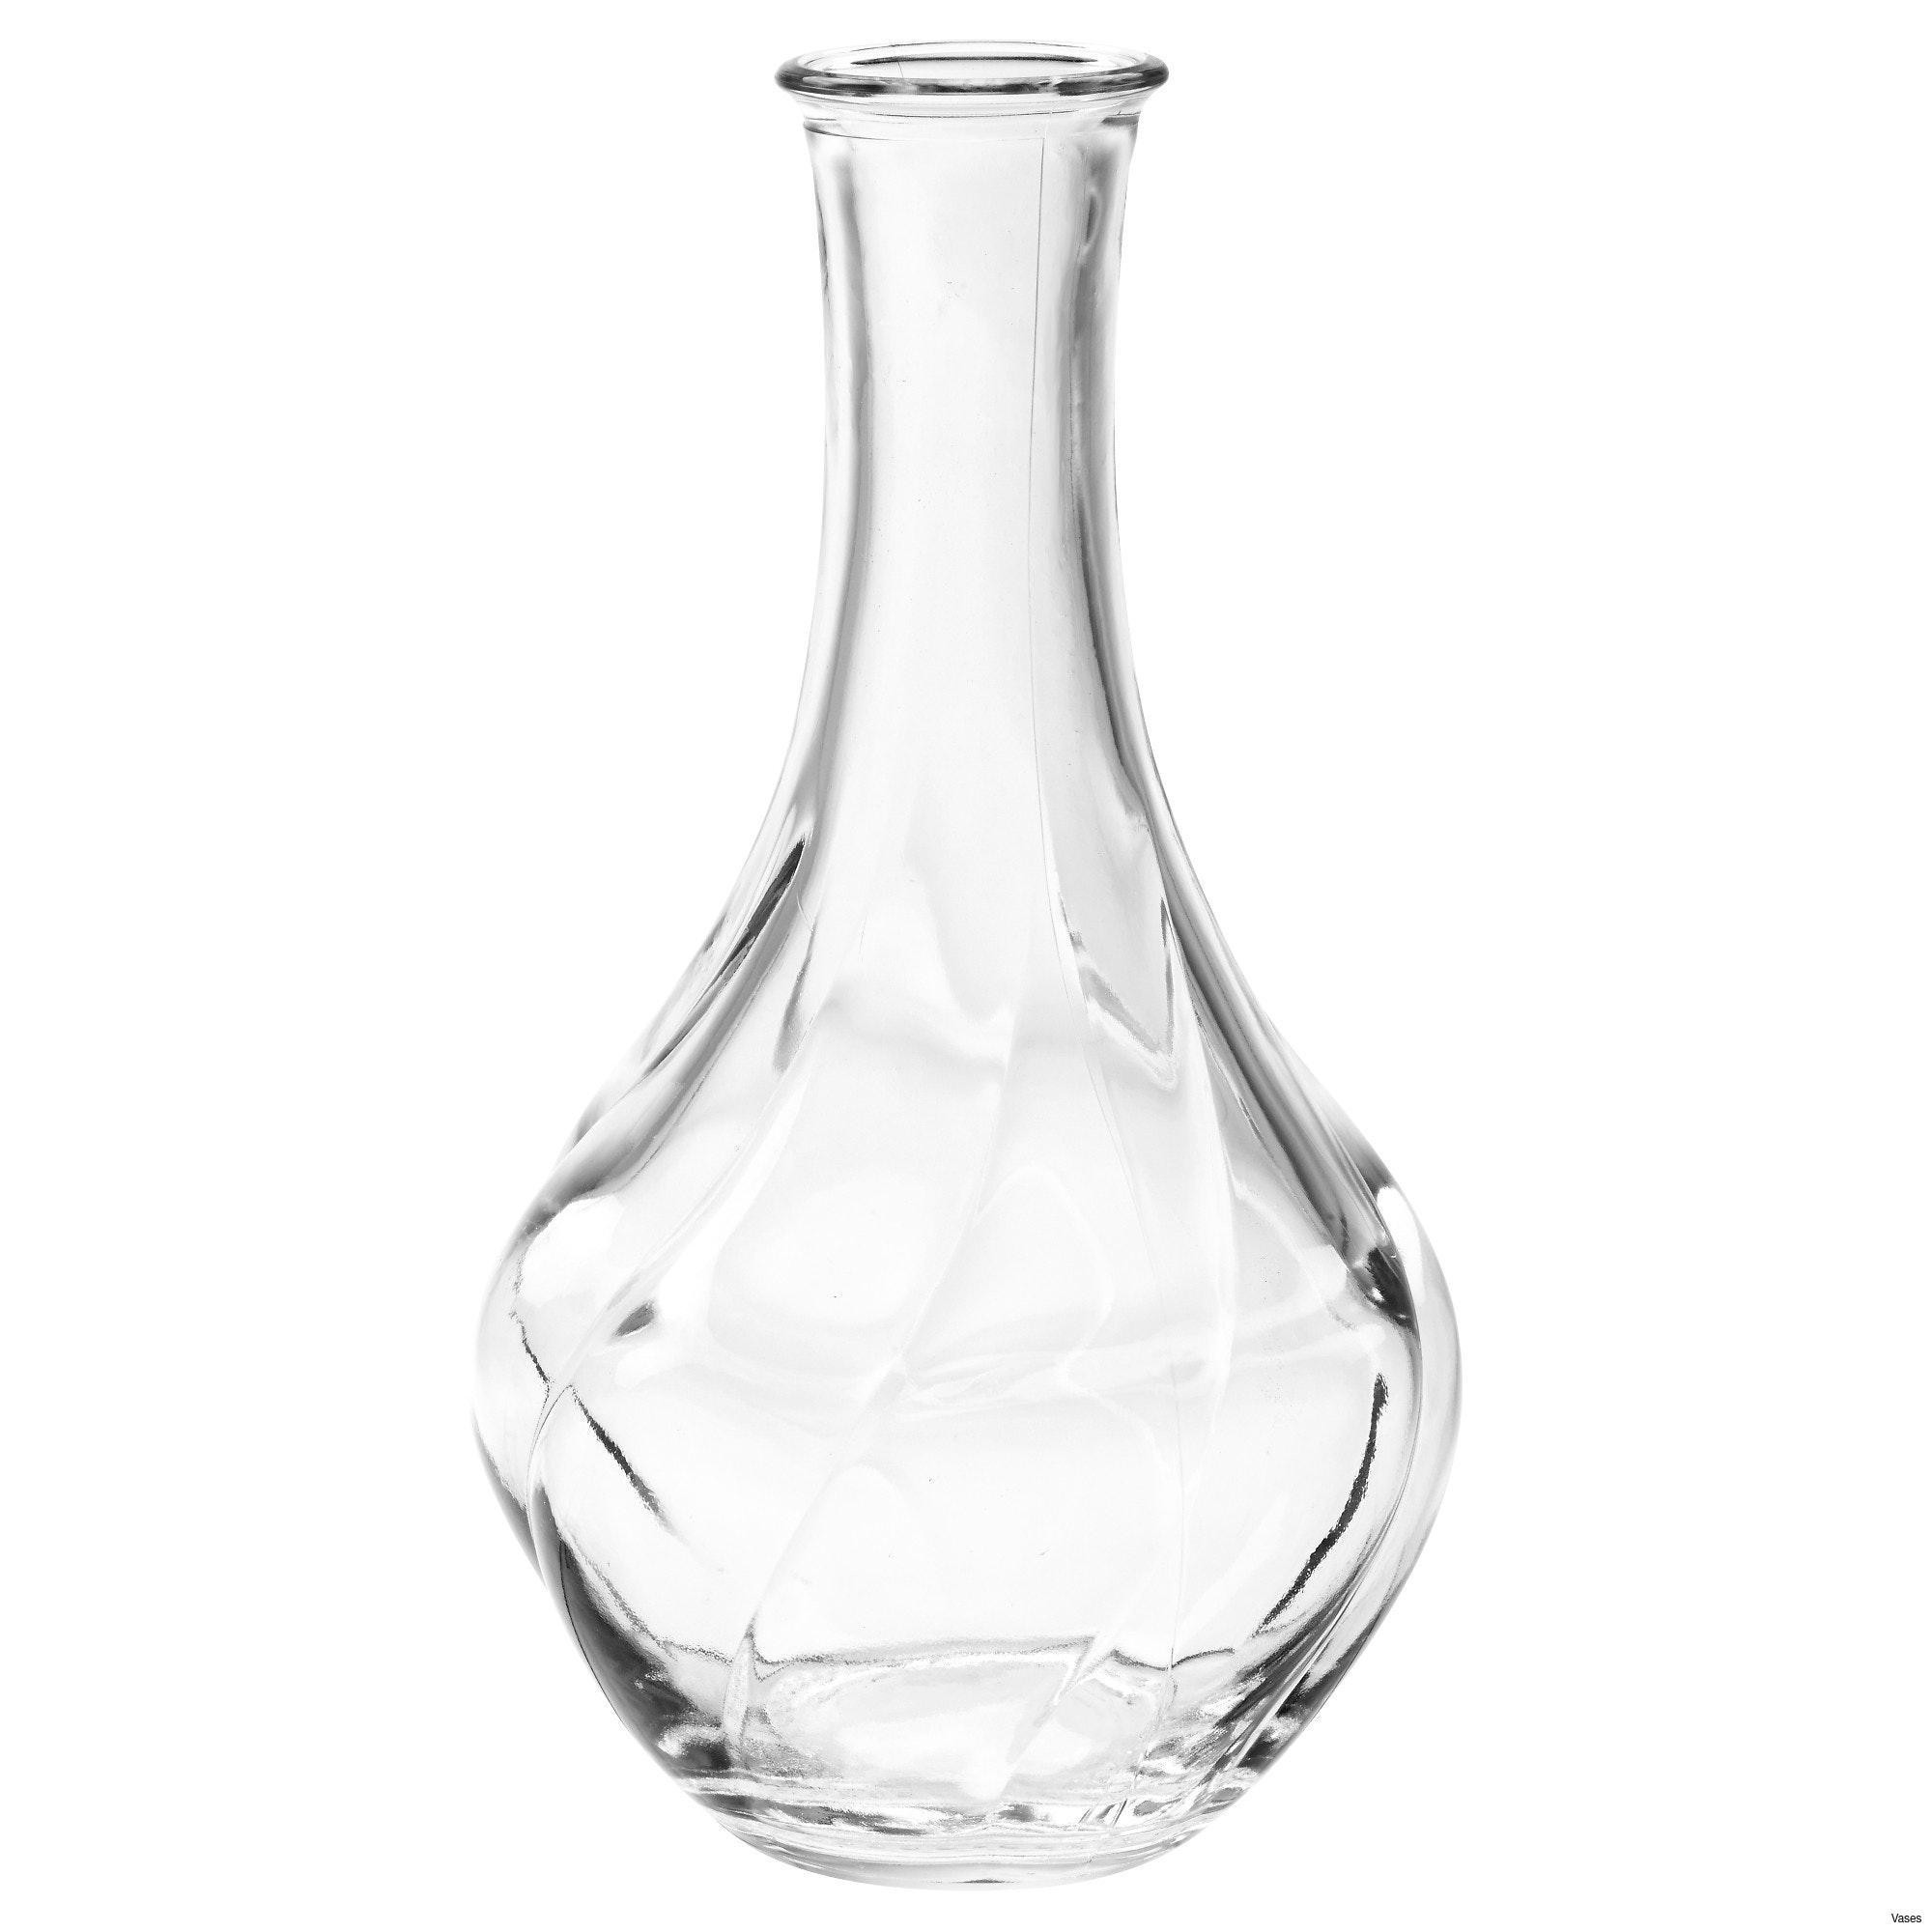 21 Stylish Clear Blue Vase 2024 free download clear blue vase of large white vases photos living room glass vases fresh clear vase 0d inside large white vases photos living room glass vases fresh clear vase 0d tags amazing and of